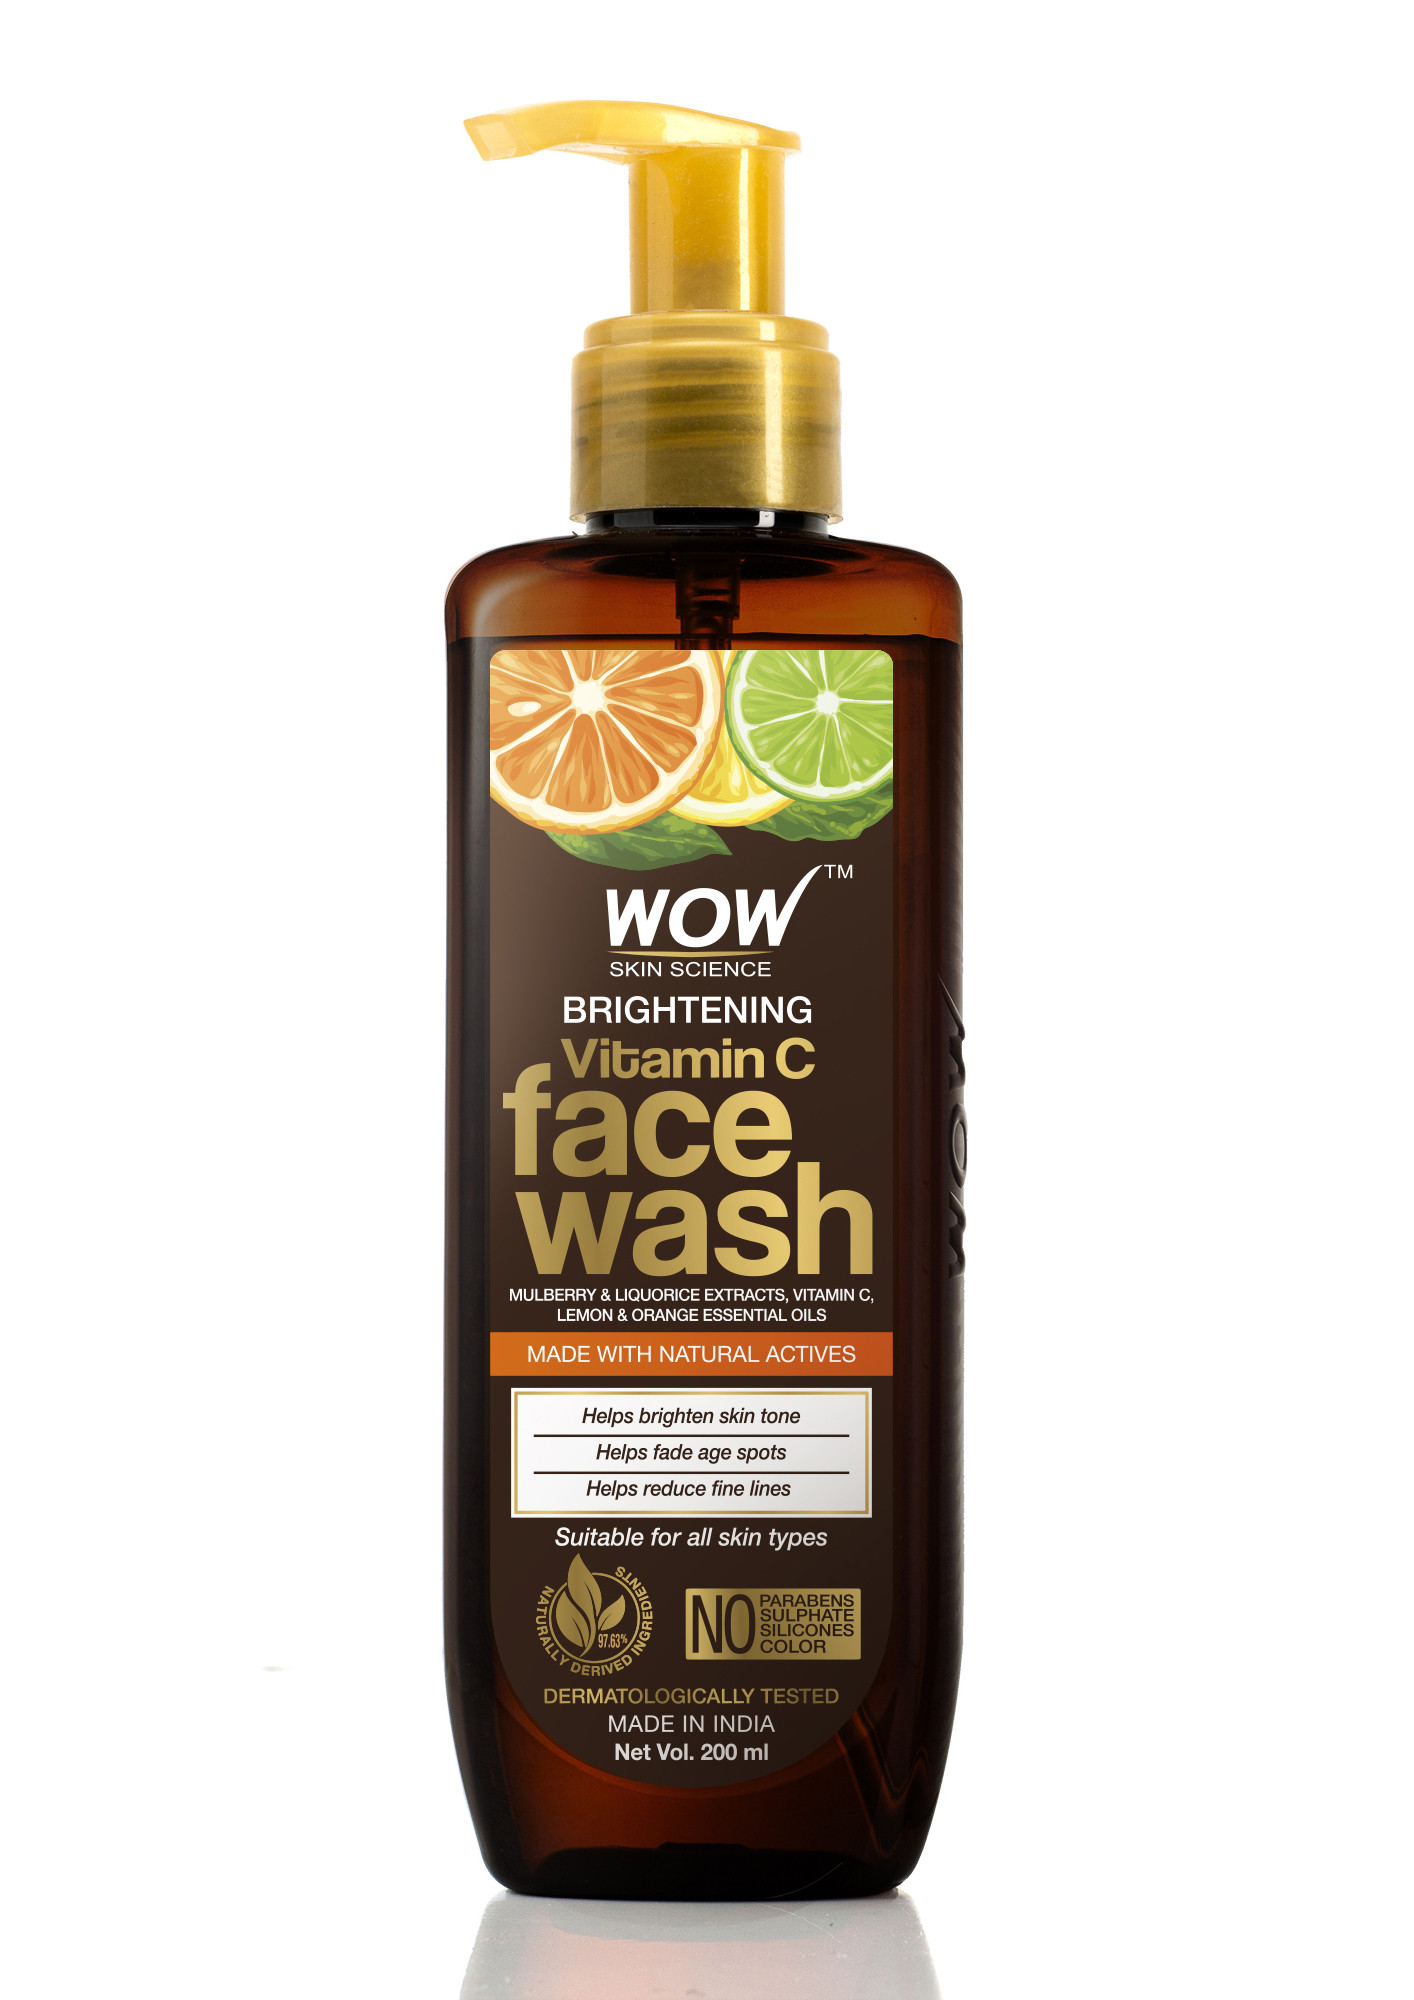 WOW Skin Science Brightening Vitamin C Face Wash - with Mulberry & Liquorice Extracts, Lemon & Orange Essential Oils - For Brightening Skin Tone - No Parabens, Sulphate, Silicones & Color - 200mL